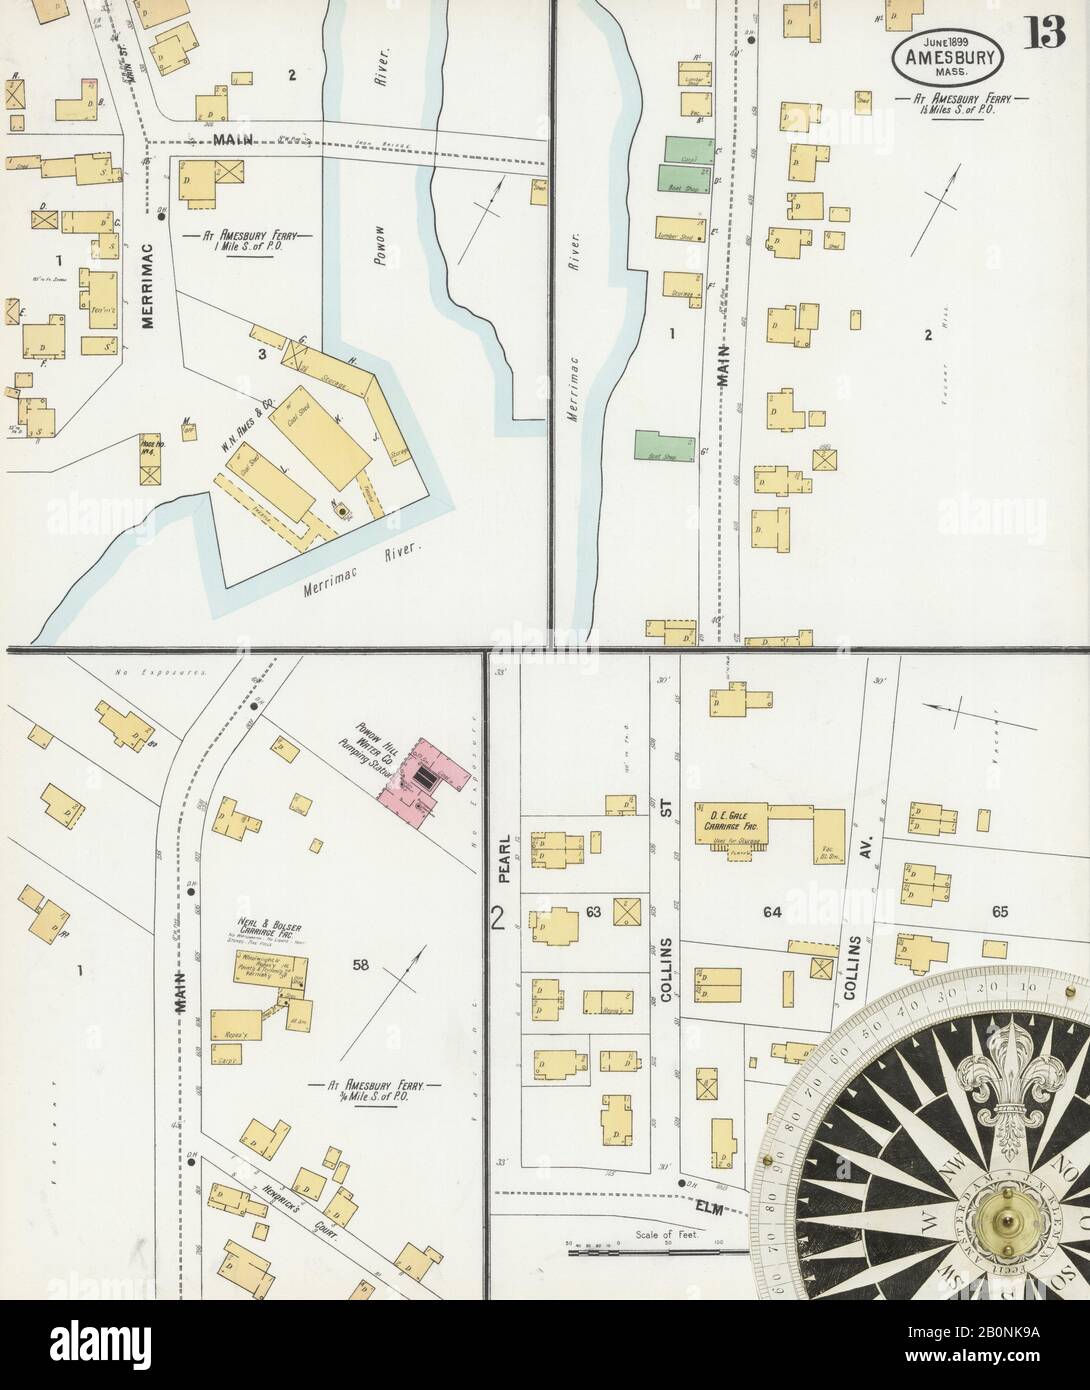 Image 13 of Sanborn Fire Insurance Map from Amesbury, Essex County, Massachusetts. Jun 1899. 14 Sheet(s), America, street map with a Nineteenth Century compass Stock Photo